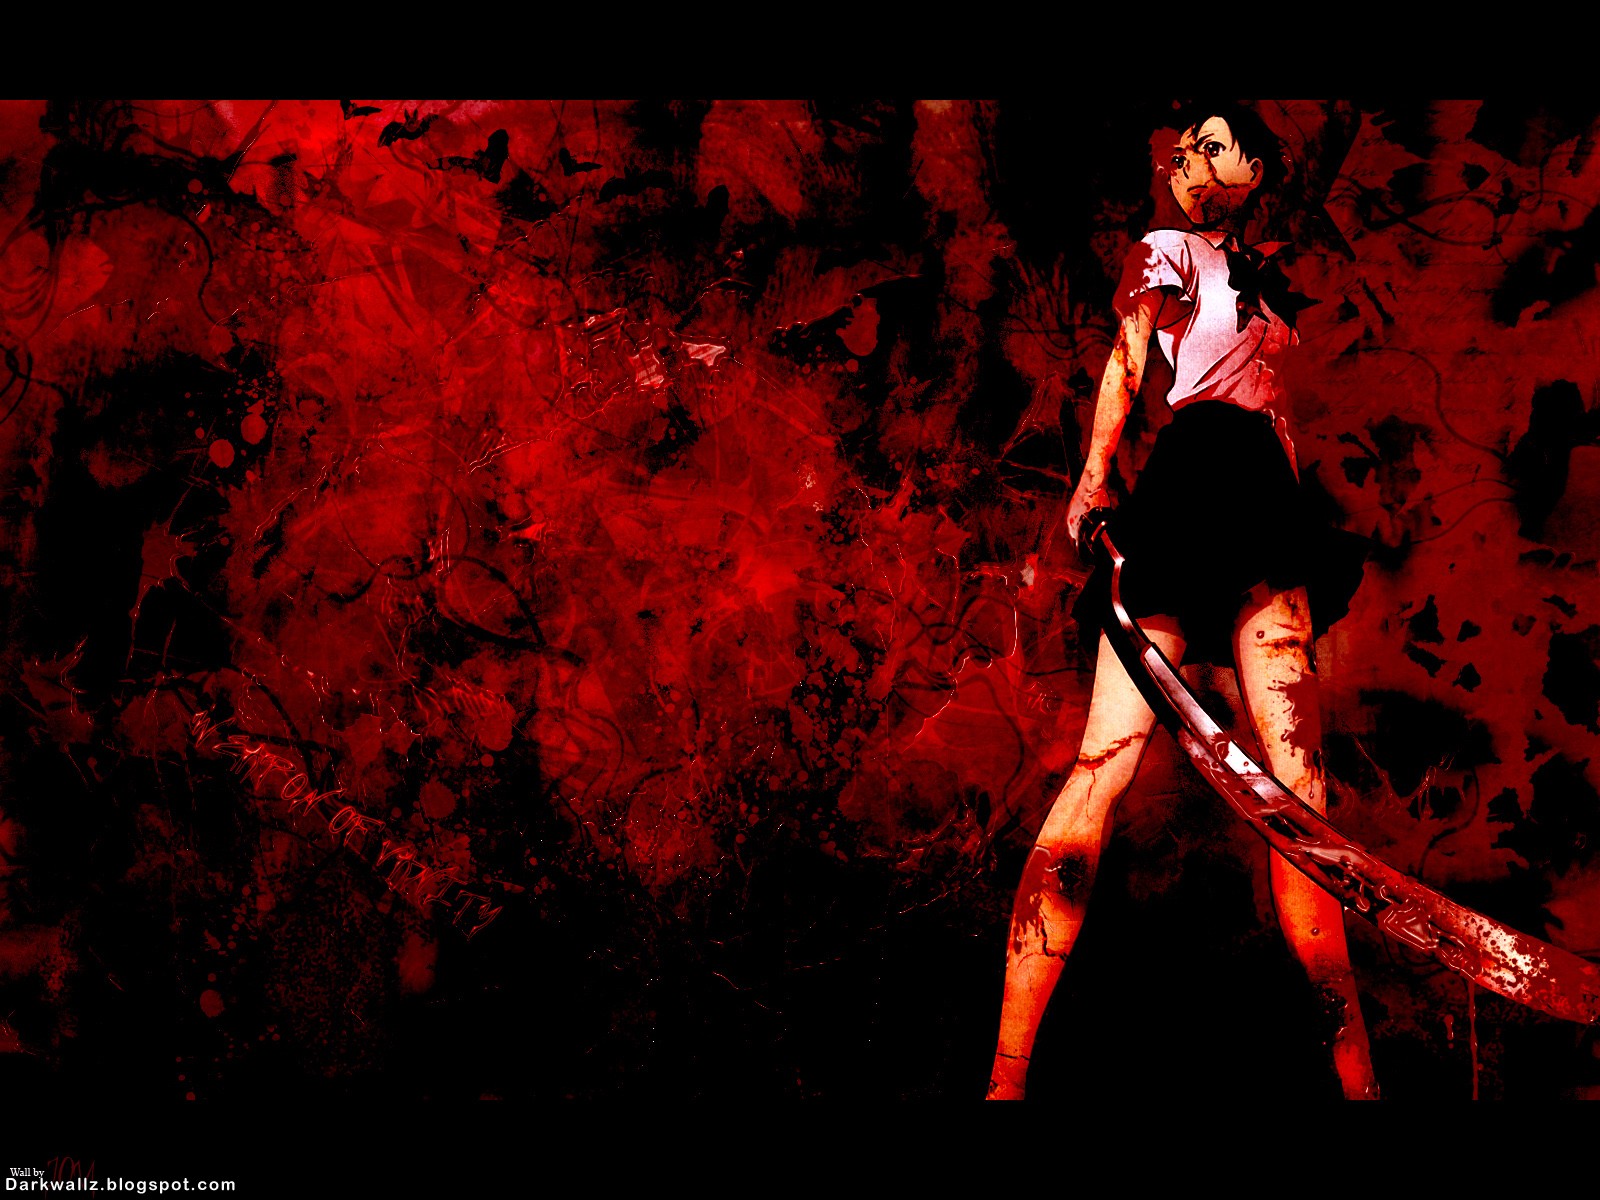 blood wallpapers 18 Dark Wallpapers High Quality Black Gothic FREE 1600x1200